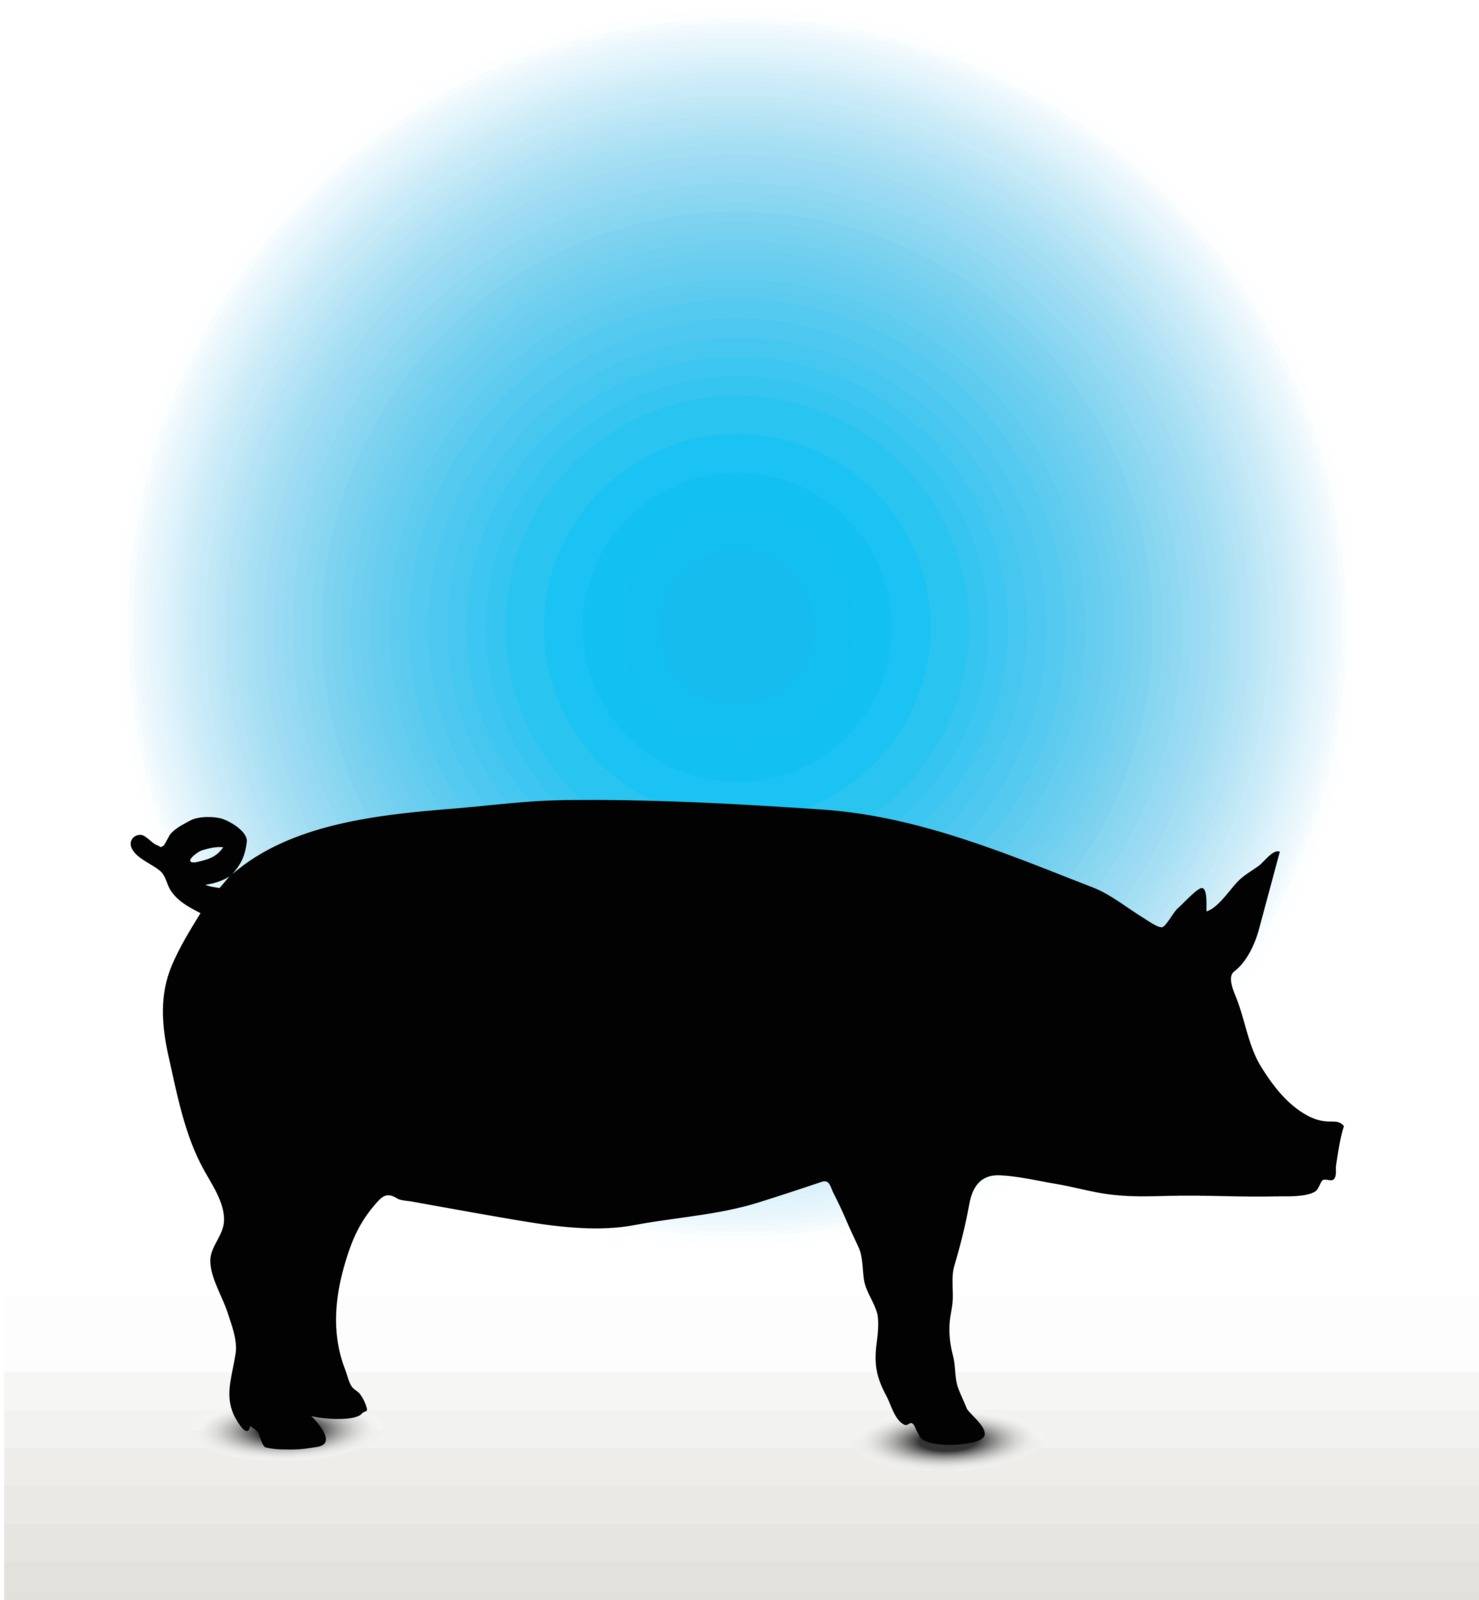 Vector Image, pig silhouette, in Curl Tail pose, isolated on white background
